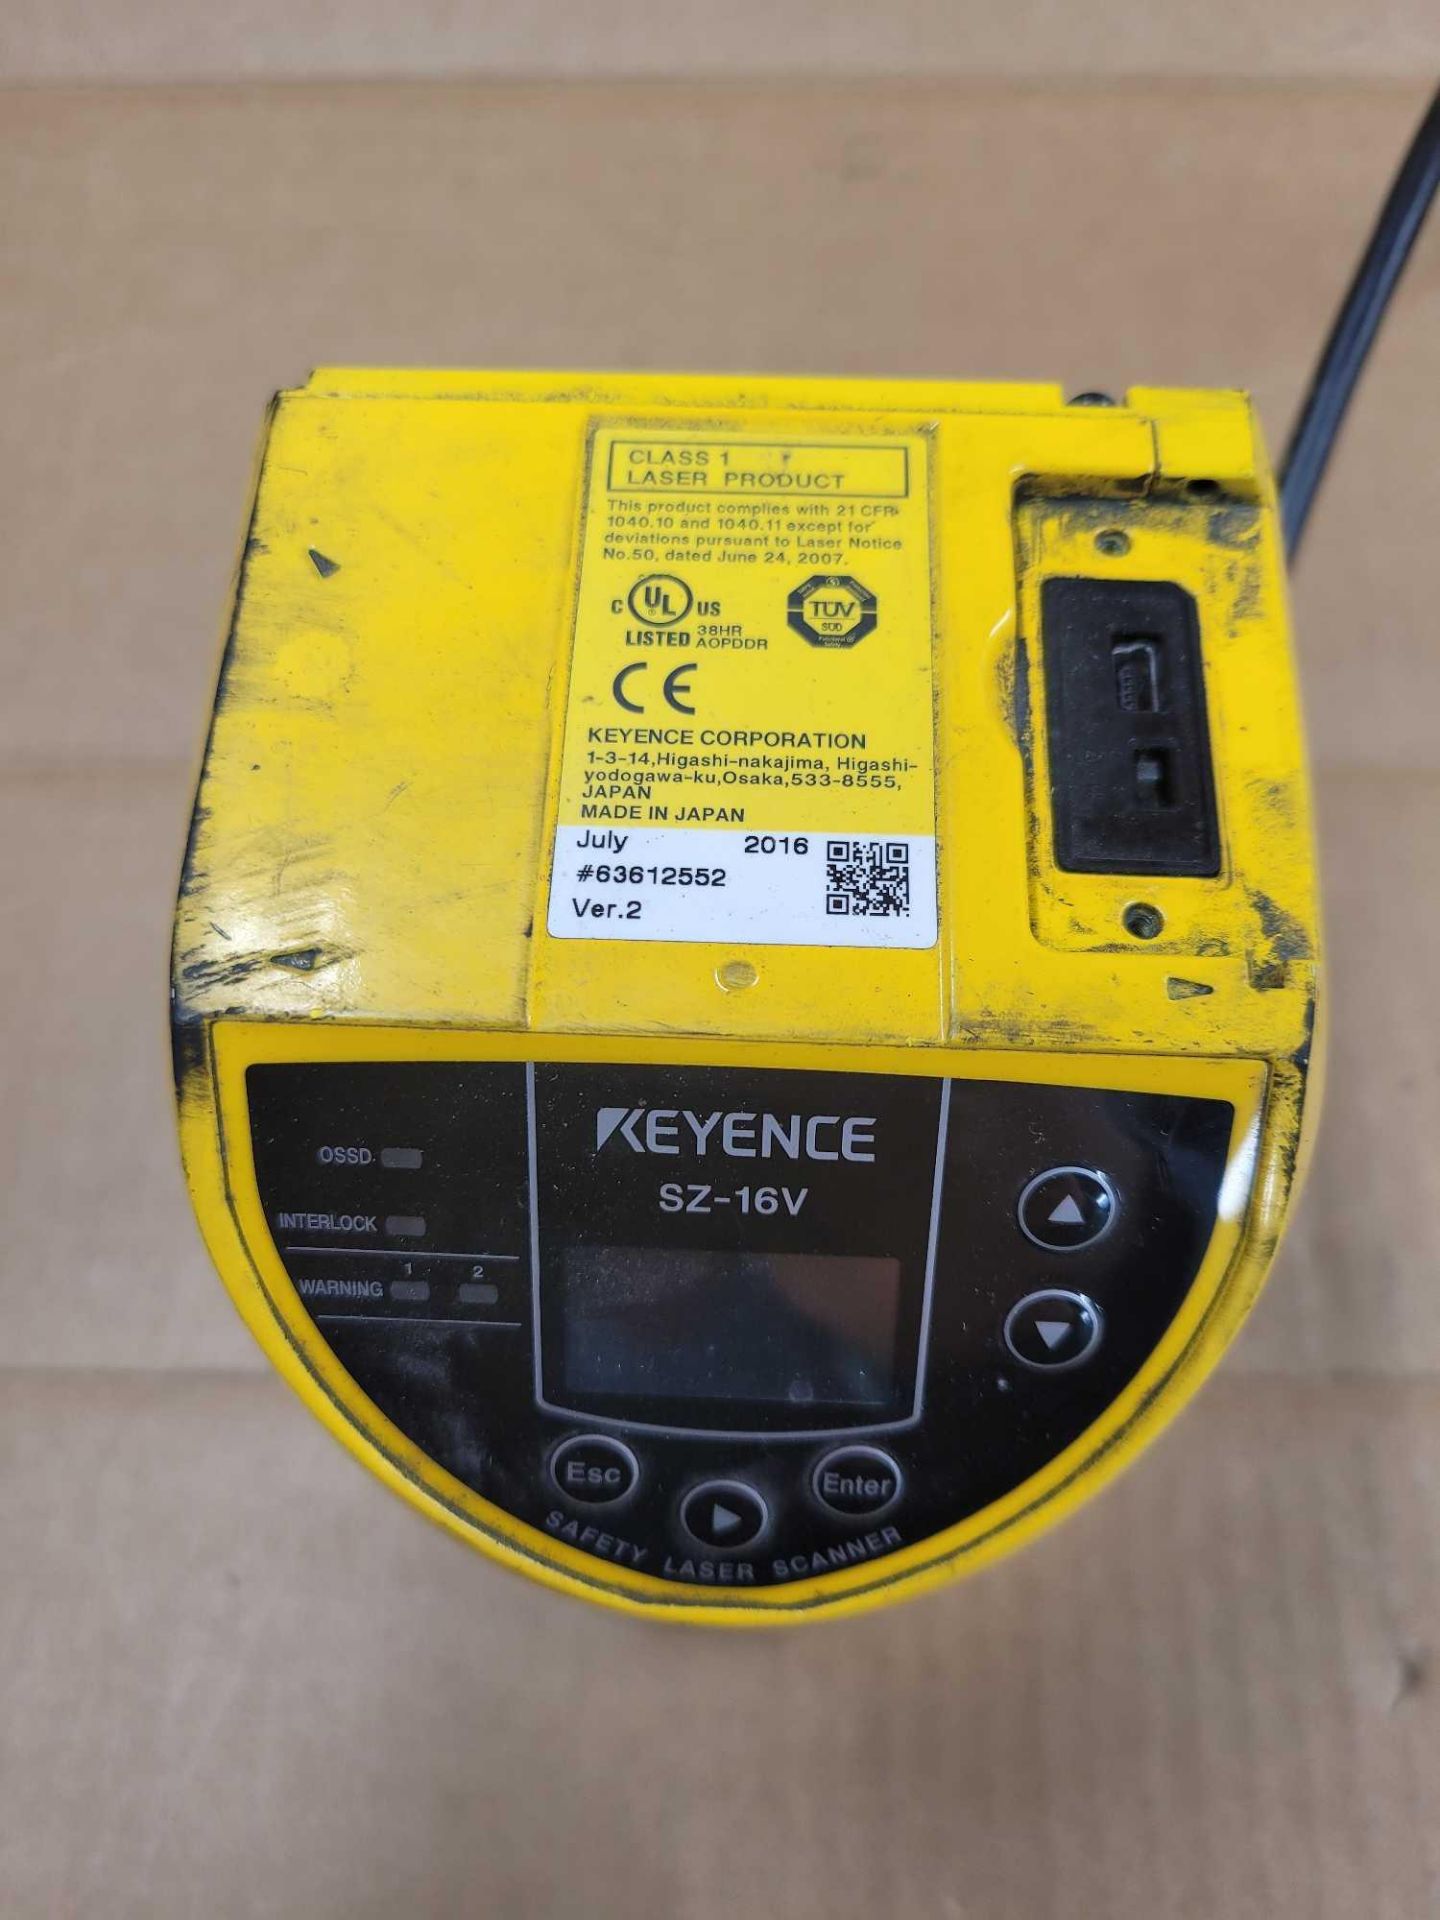 KEYENCE SZ-16V / Safety Laser Scanner  /  Lot Weight: 3.4 lbs - Image 7 of 8